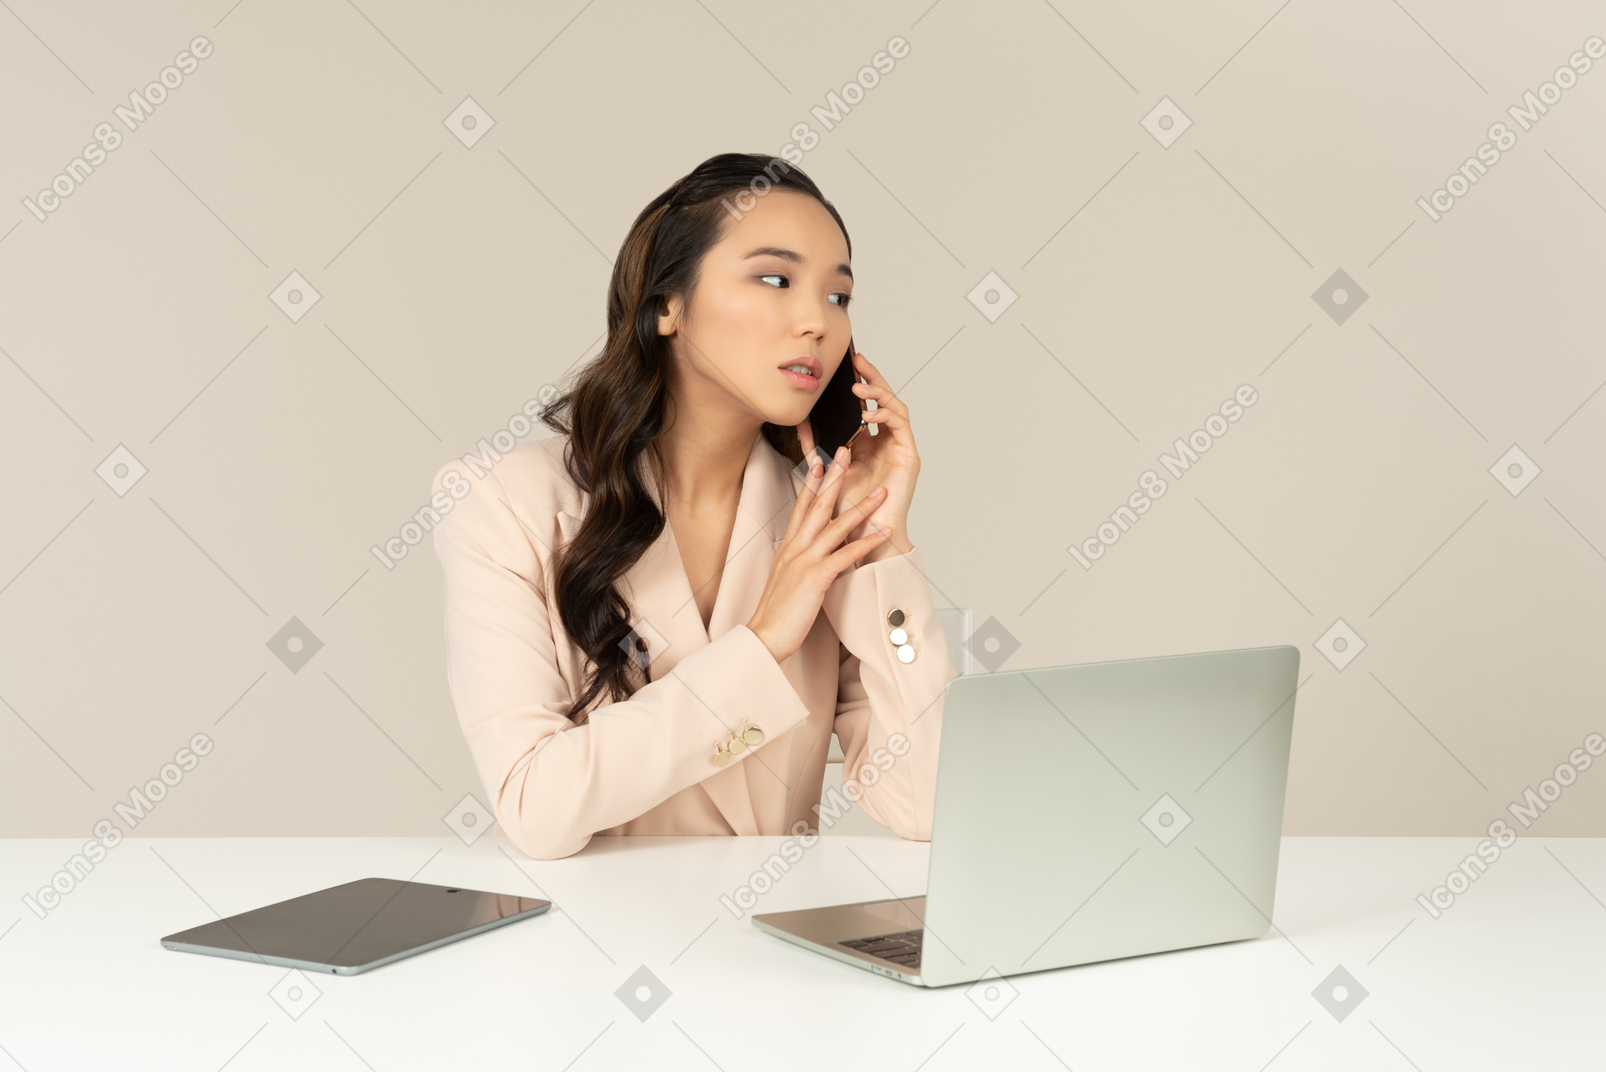 Asian female office employee listening carefully to phone call